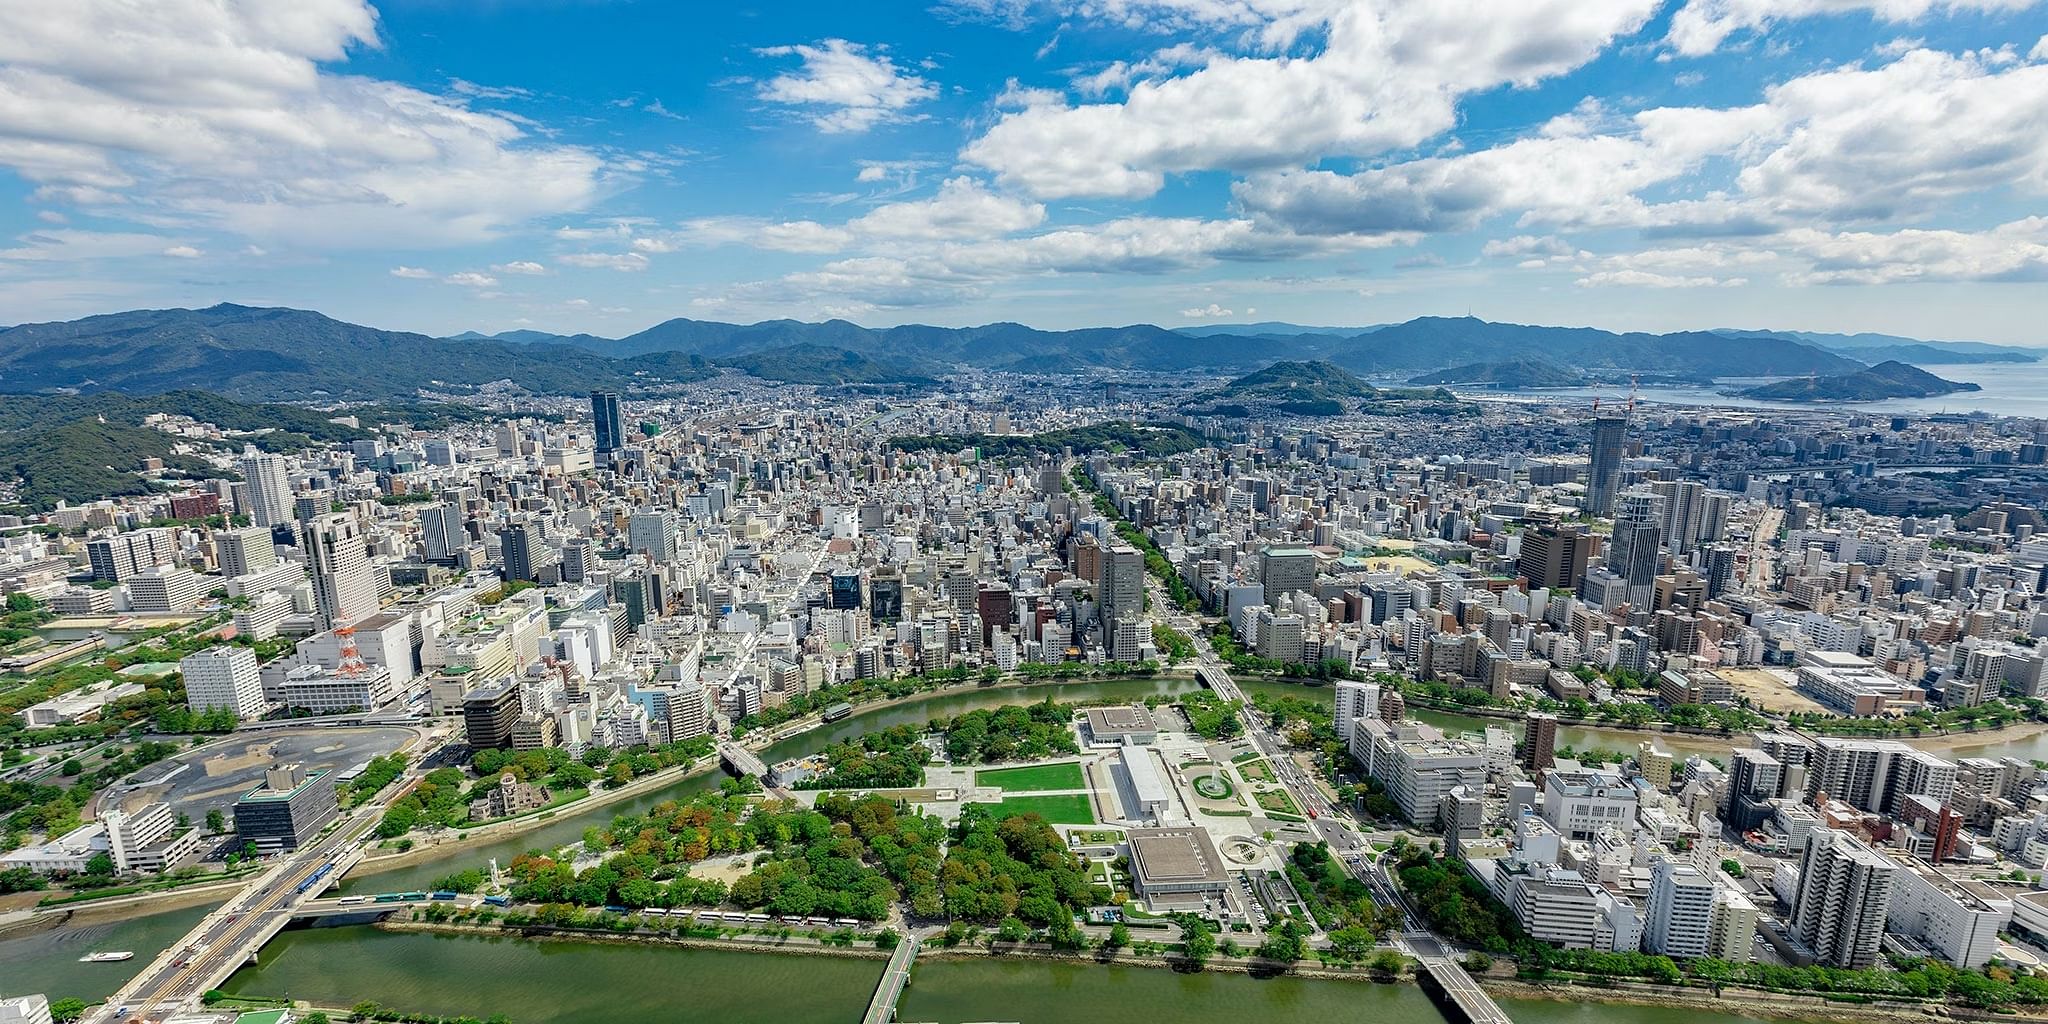 Helicopter tour - Hiroshima Prefecture